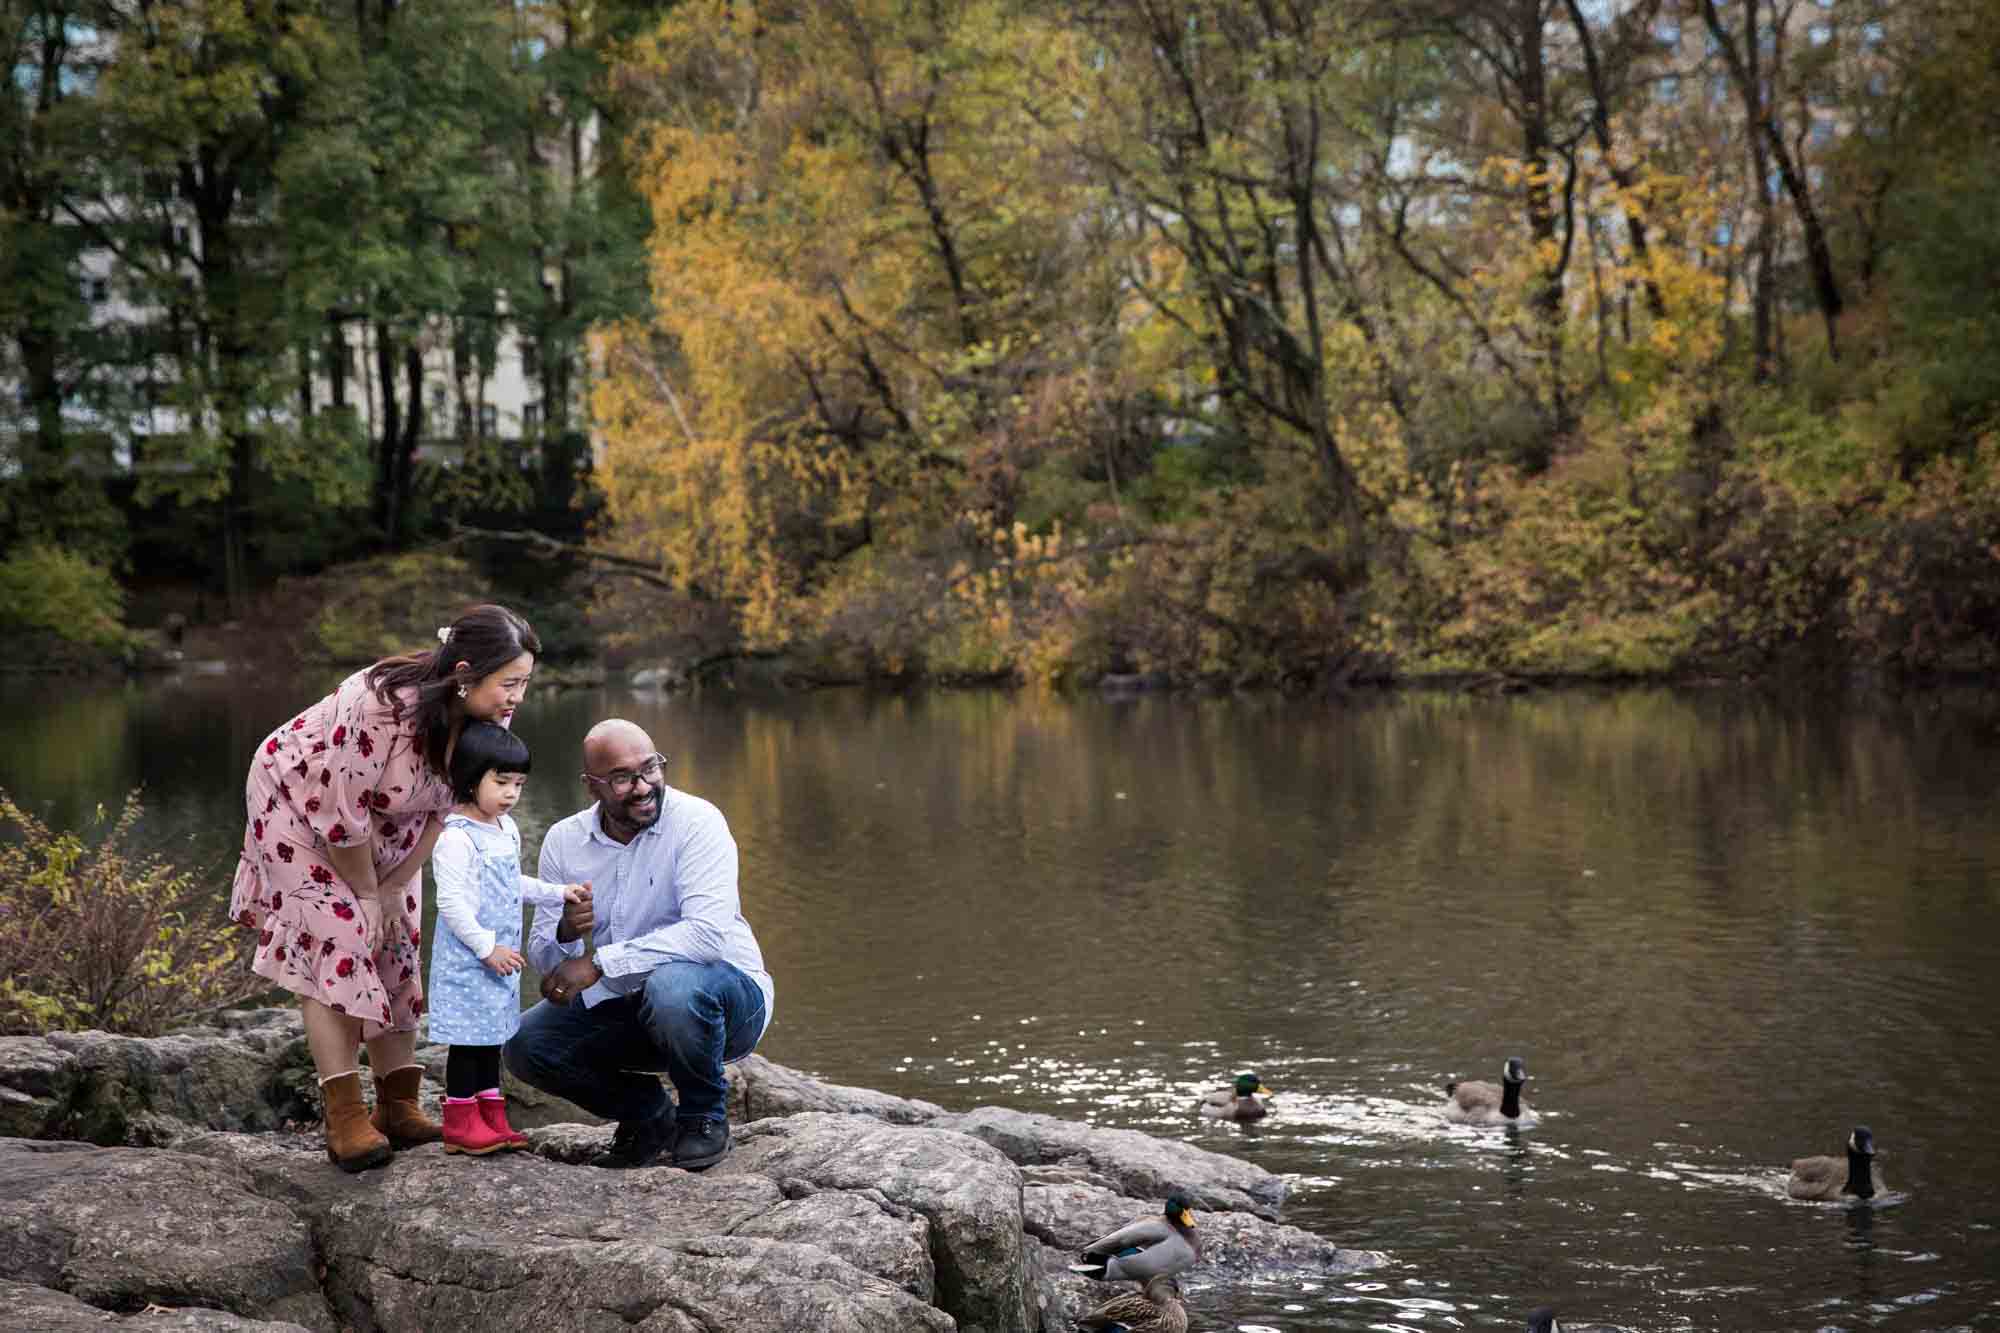 Parents pointing out ducks to little girl along lake for an article on Central Park winter portrait tips